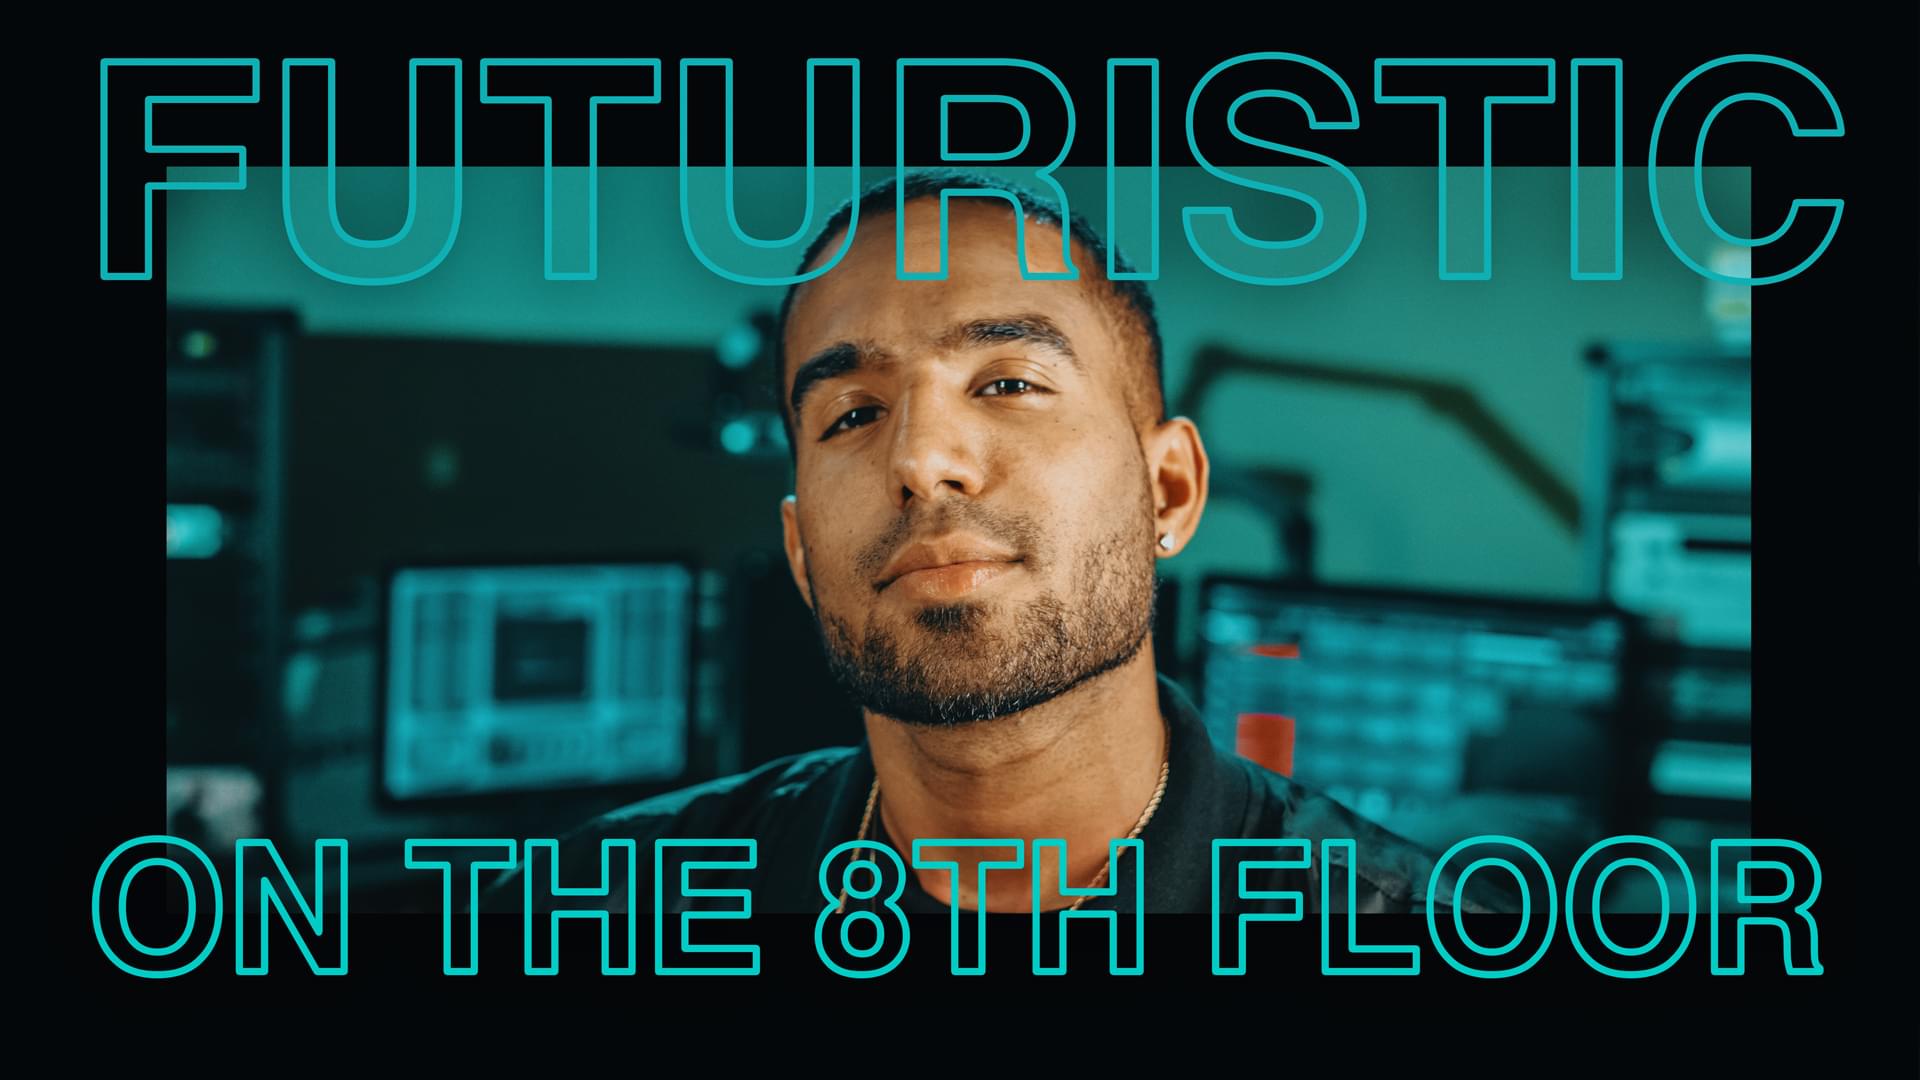 Futuristic Performs “Feel Me” LIVE #OnThe8thFloor [WATCH]